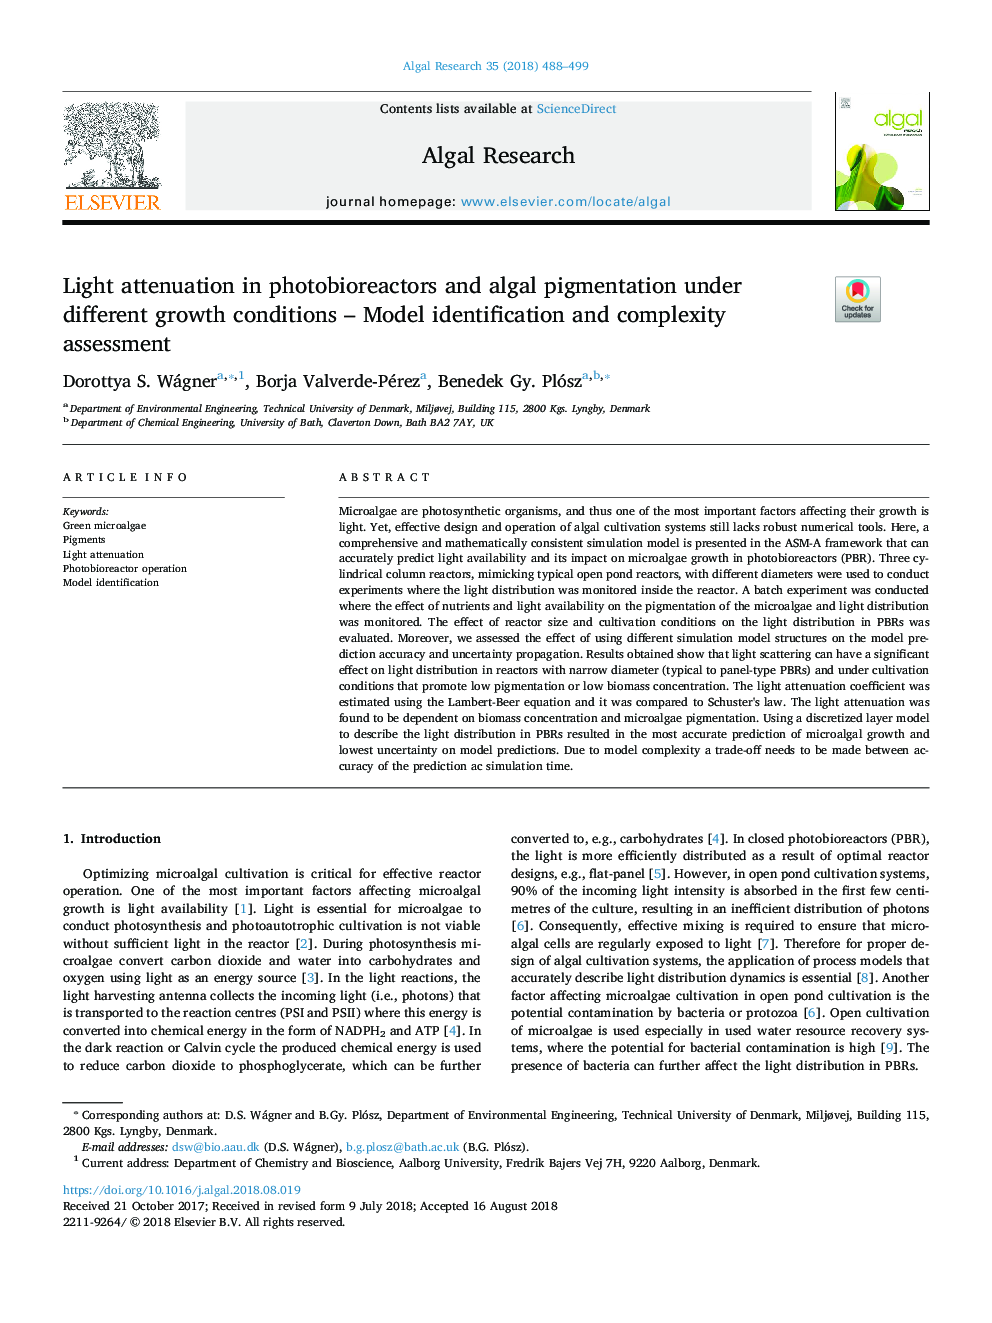 Light attenuation in photobioreactors and algal pigmentation under different growth conditions - Model identification and complexity assessment